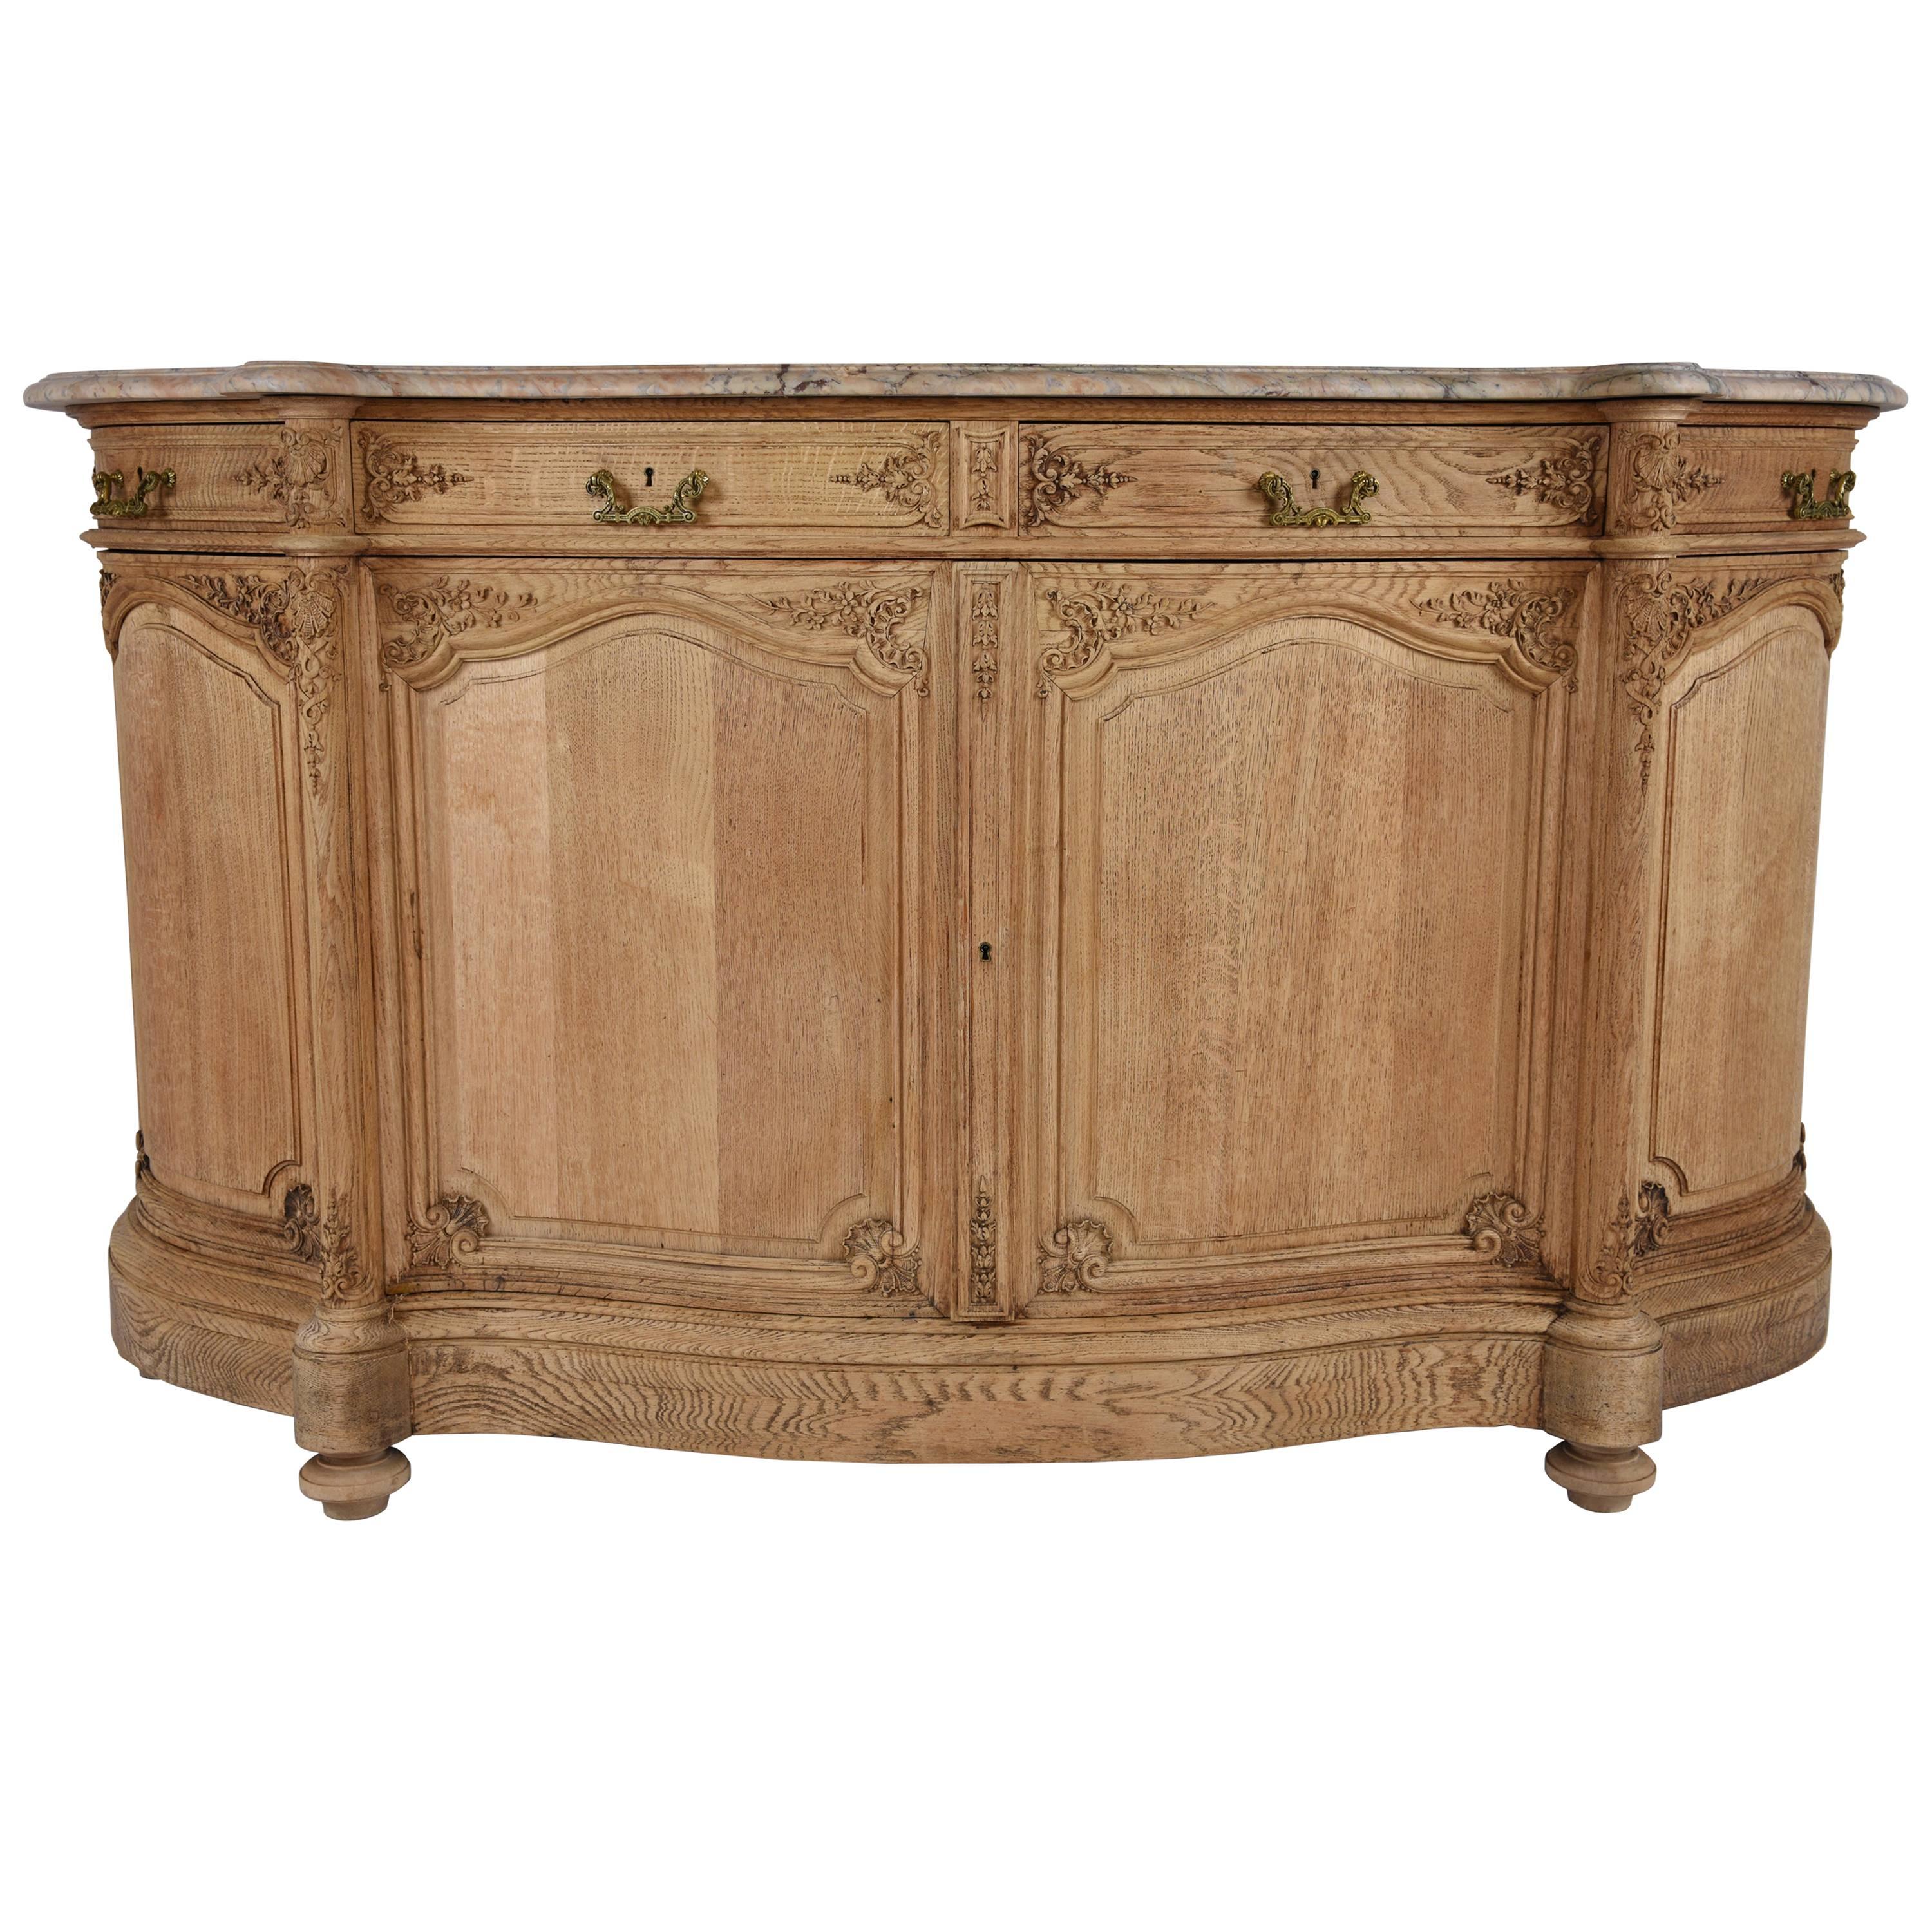 19th Century French Louis XVI Style Bleached Oakwood Buffet by Mercier Freres